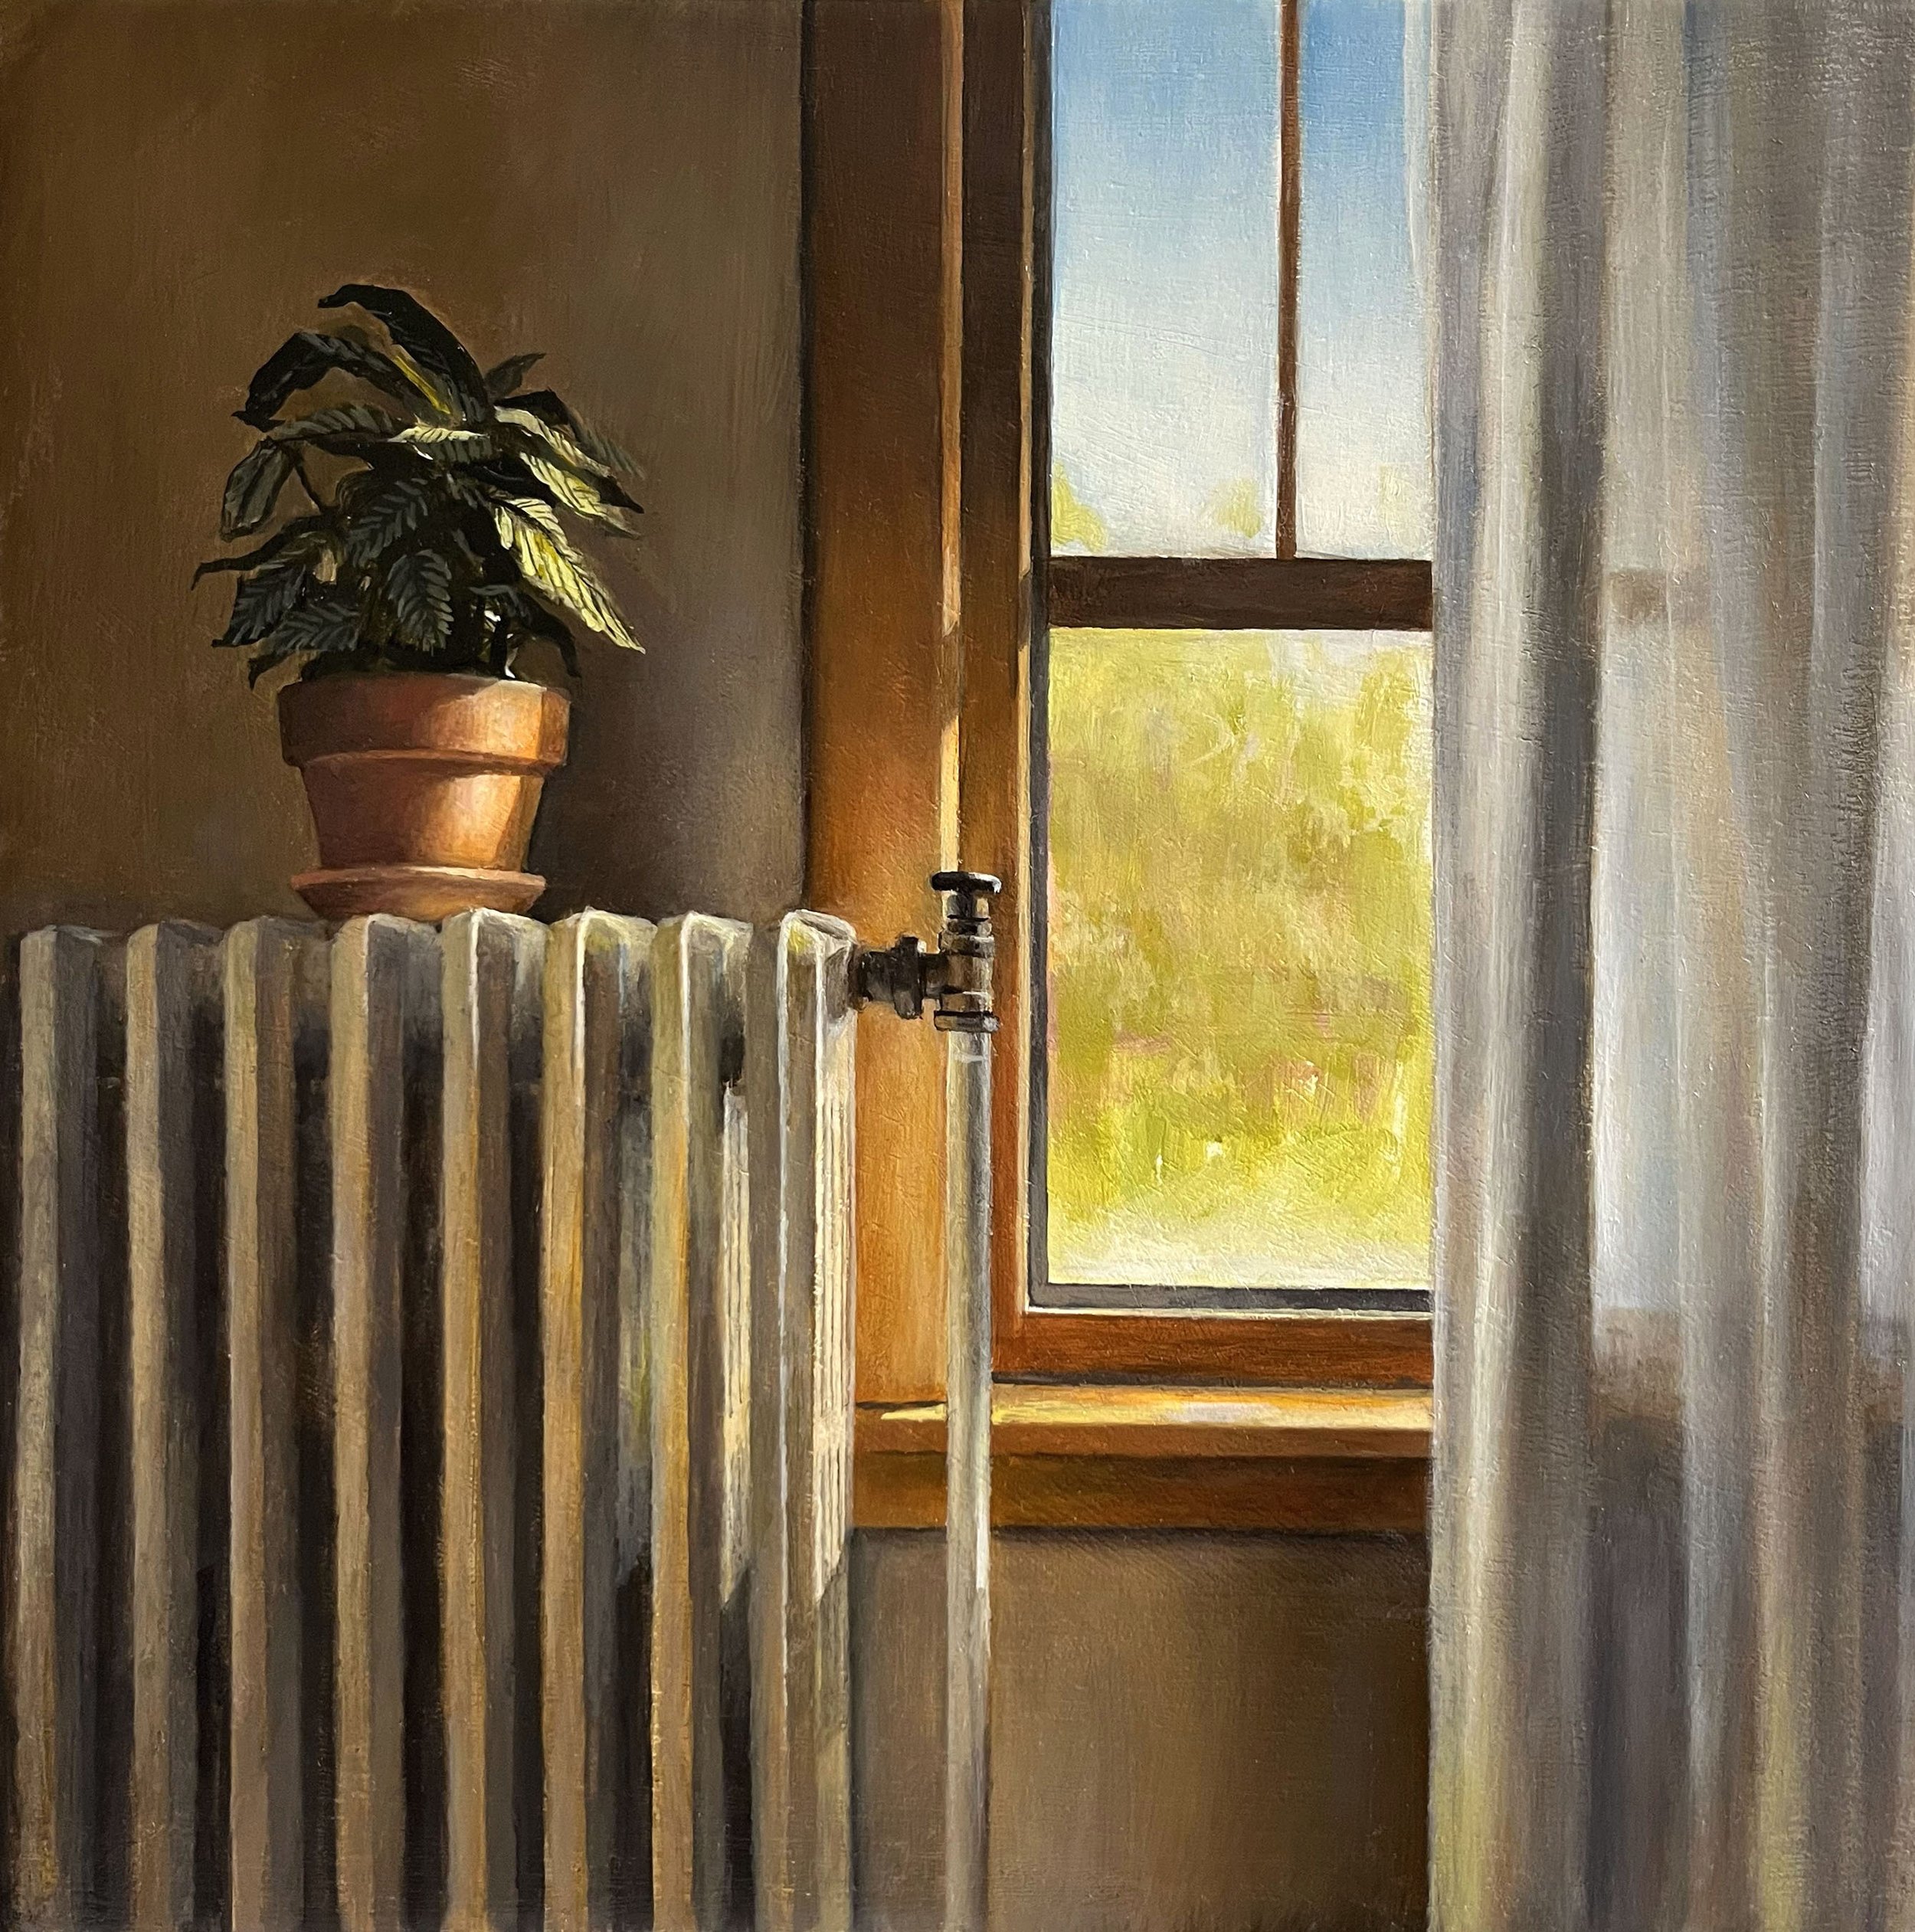   Plant on Radiator   2023  Oil on linen over panel  10 x 10 inches   